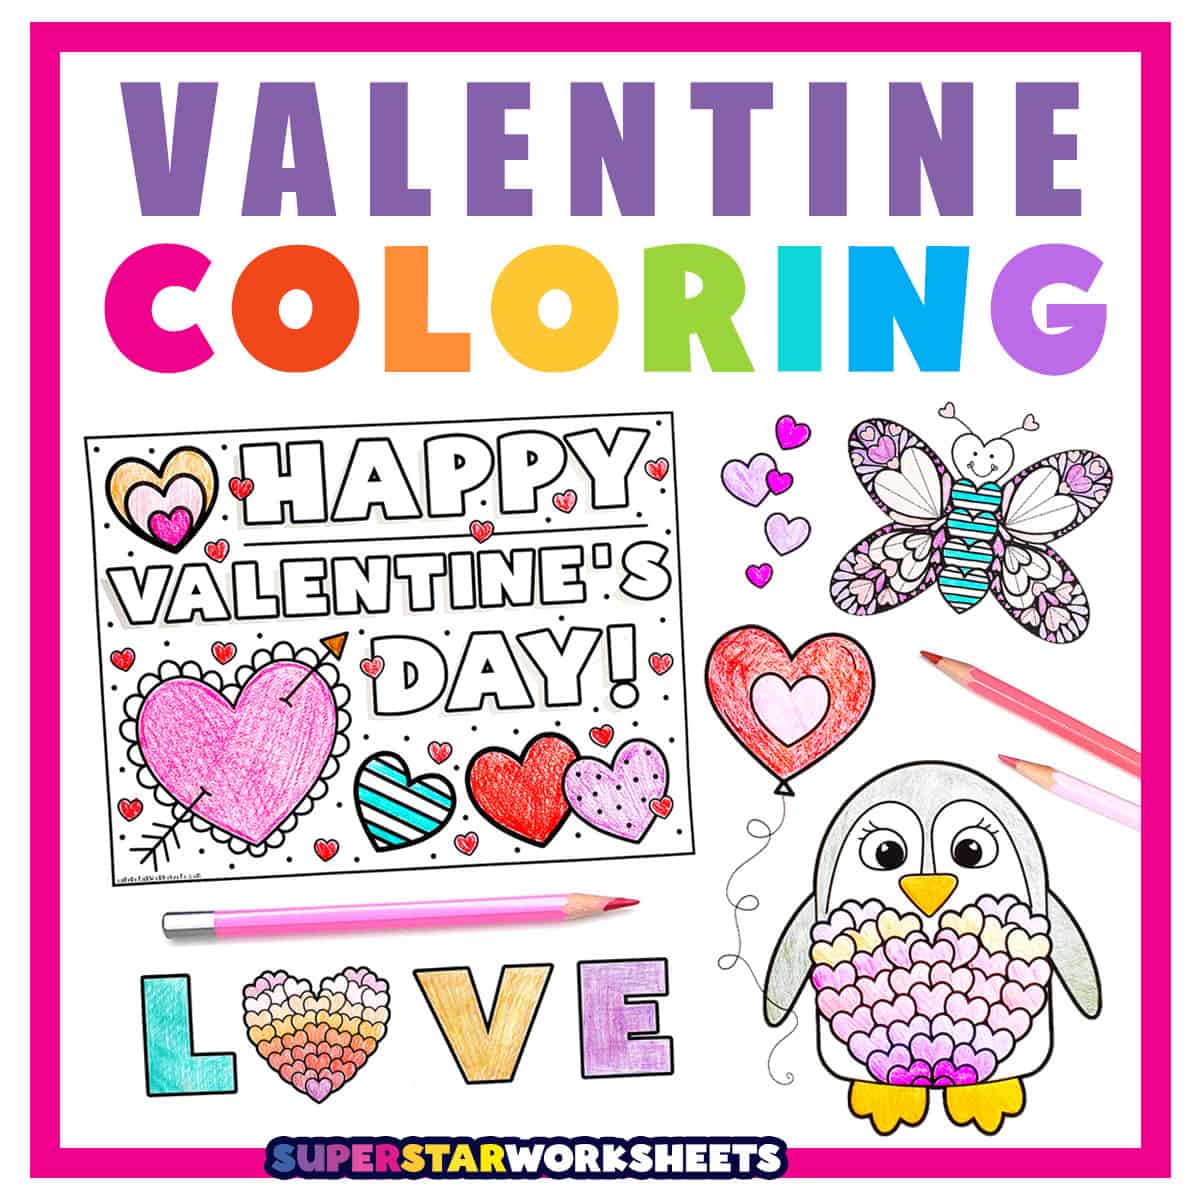 Printable Hearts to Color (PDF Download)  Heart coloring pages, Heart  shapes template, Valentine crafts for kids